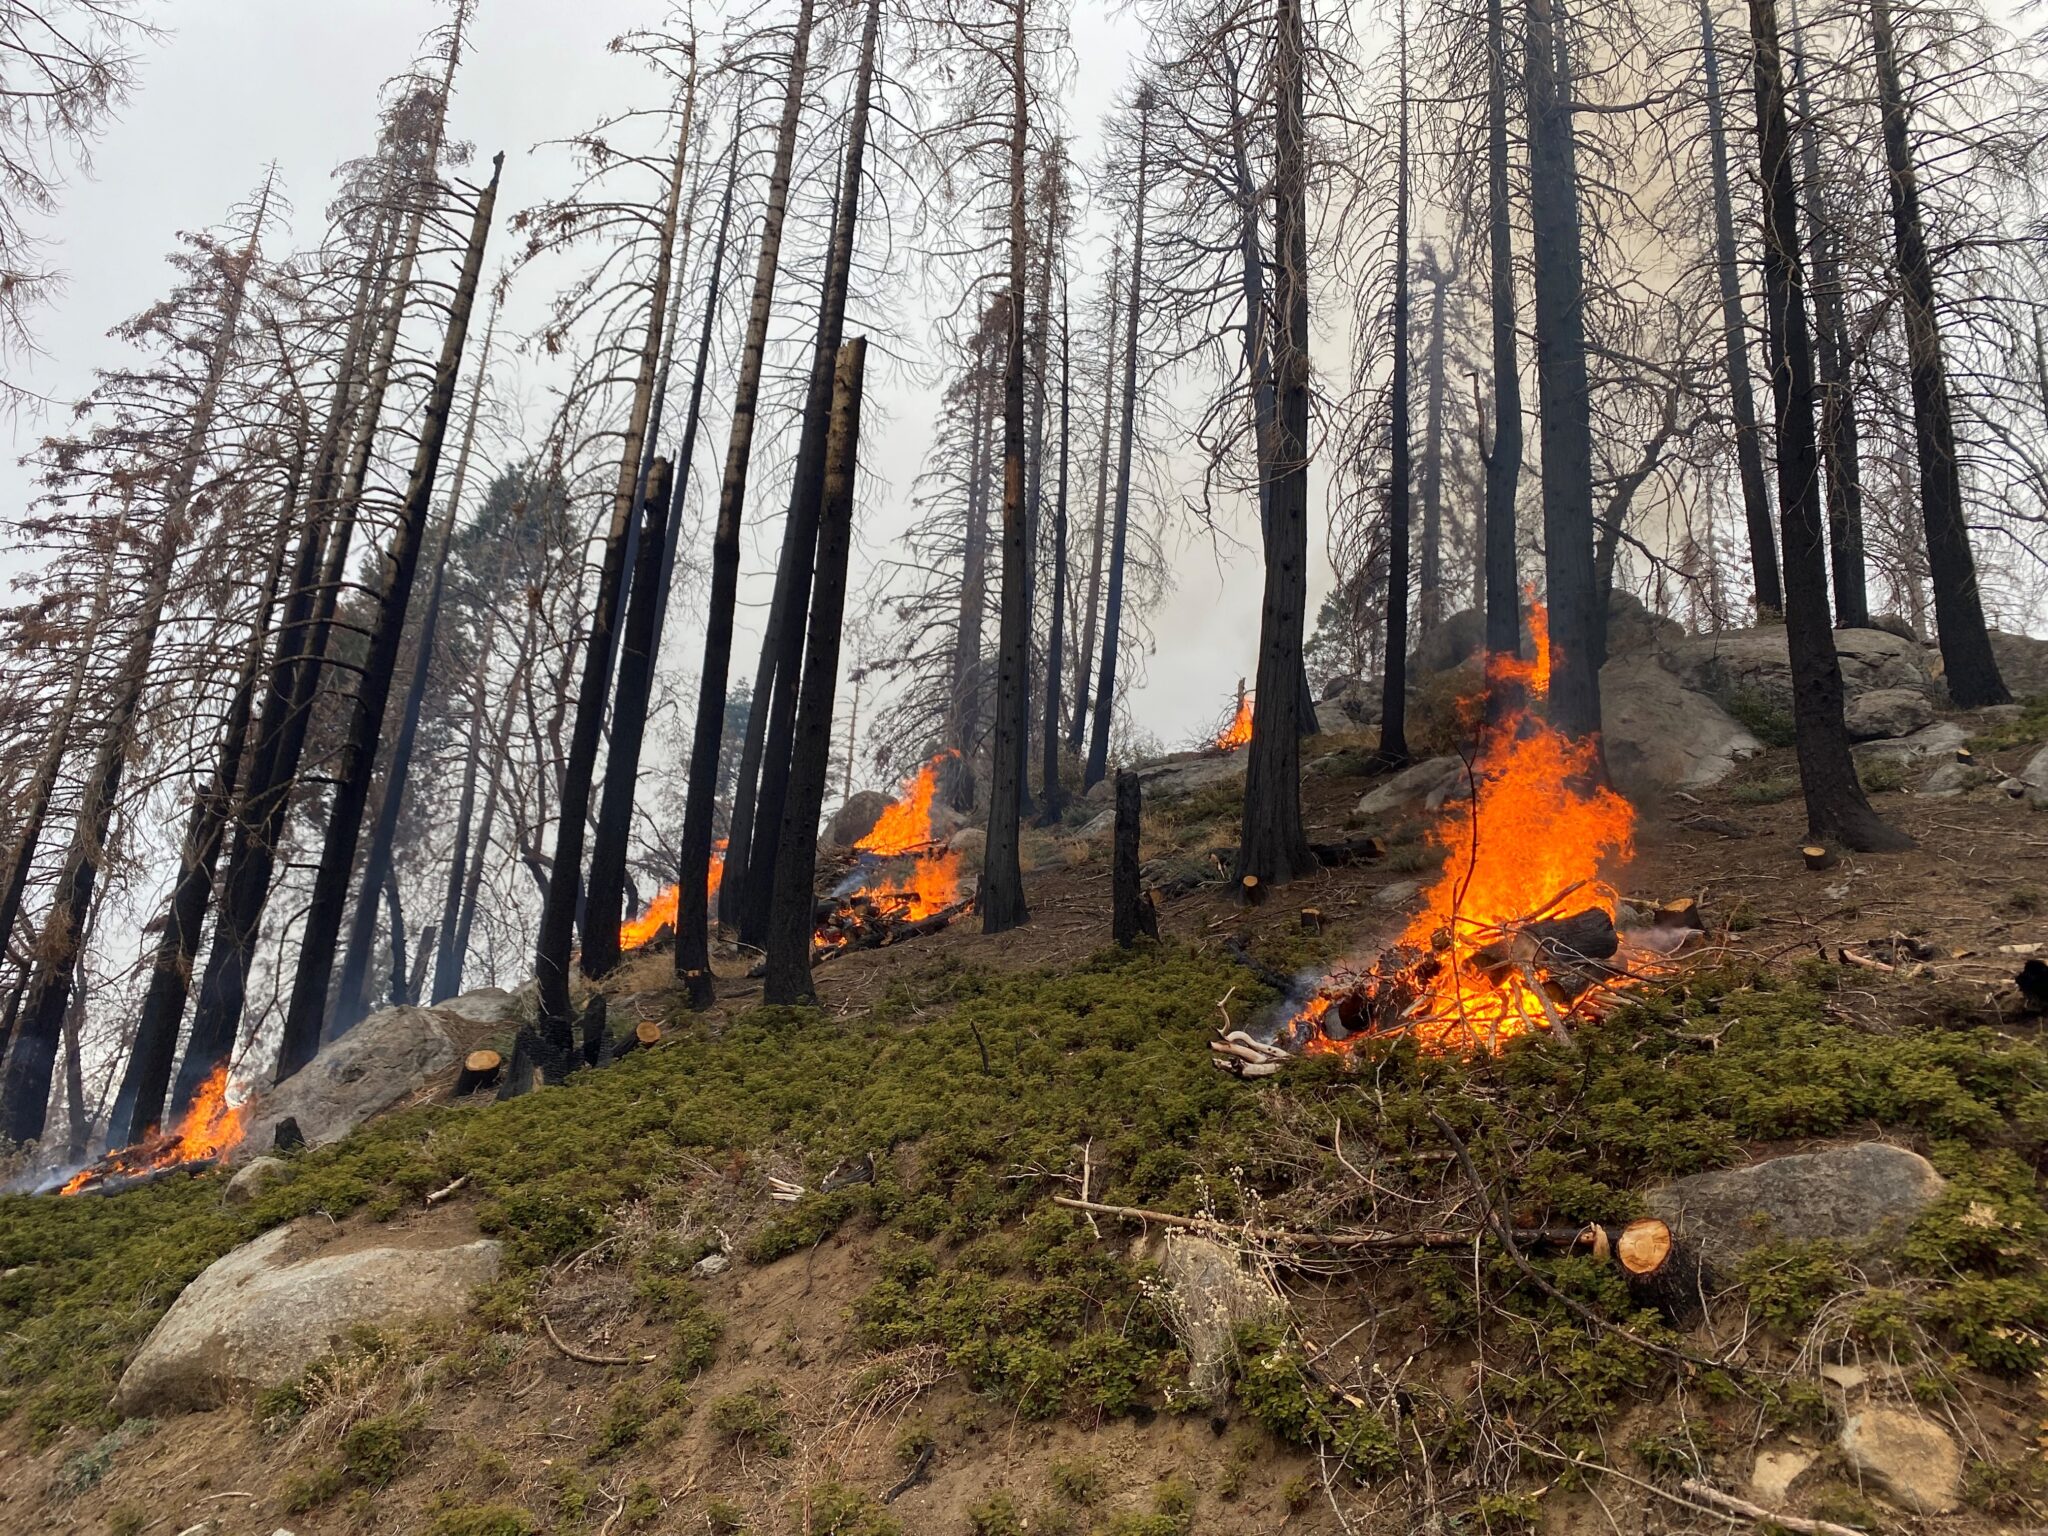 Pile burning at Alder Creek Grove in 2022 to reduce fuel, part of a larger project to restore areas that were impacted by the SQF Complex fires. Photo by Noam Knopf-Boyer, FRST Corp, courtesy of Save the Redwoods League